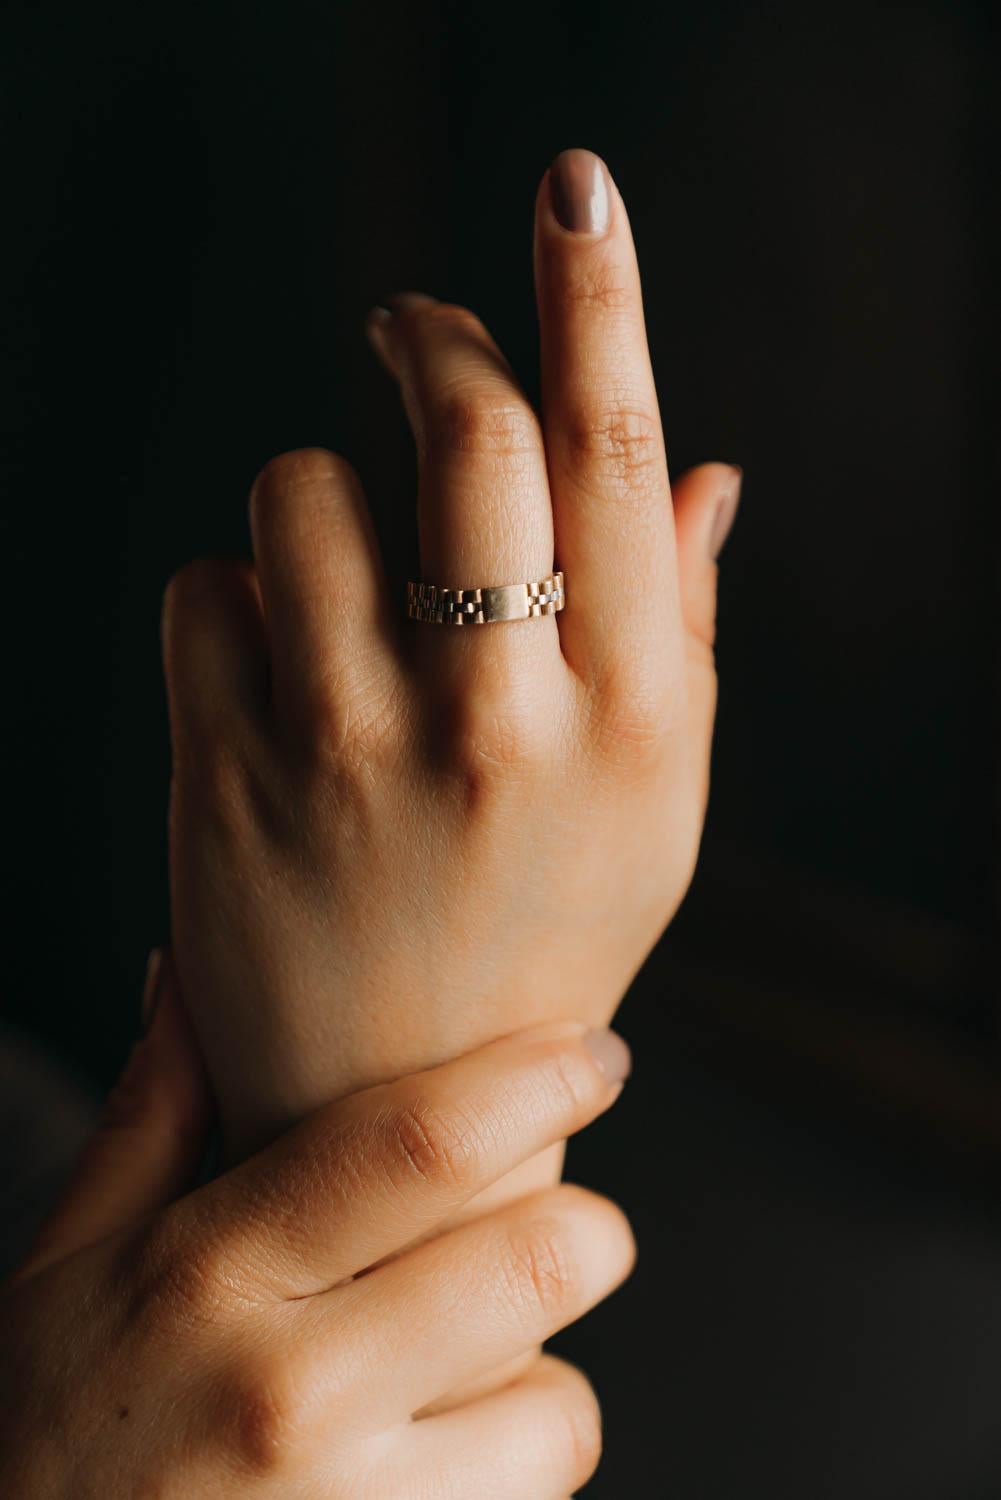 This stylish retro-inspired gold ring is guaranteed to be your new favorite statement piece! This delicate ring is made from 14 kt yellow gold little bricks that are interconnected in three rows and looks like a neat link chain. 

The band is made